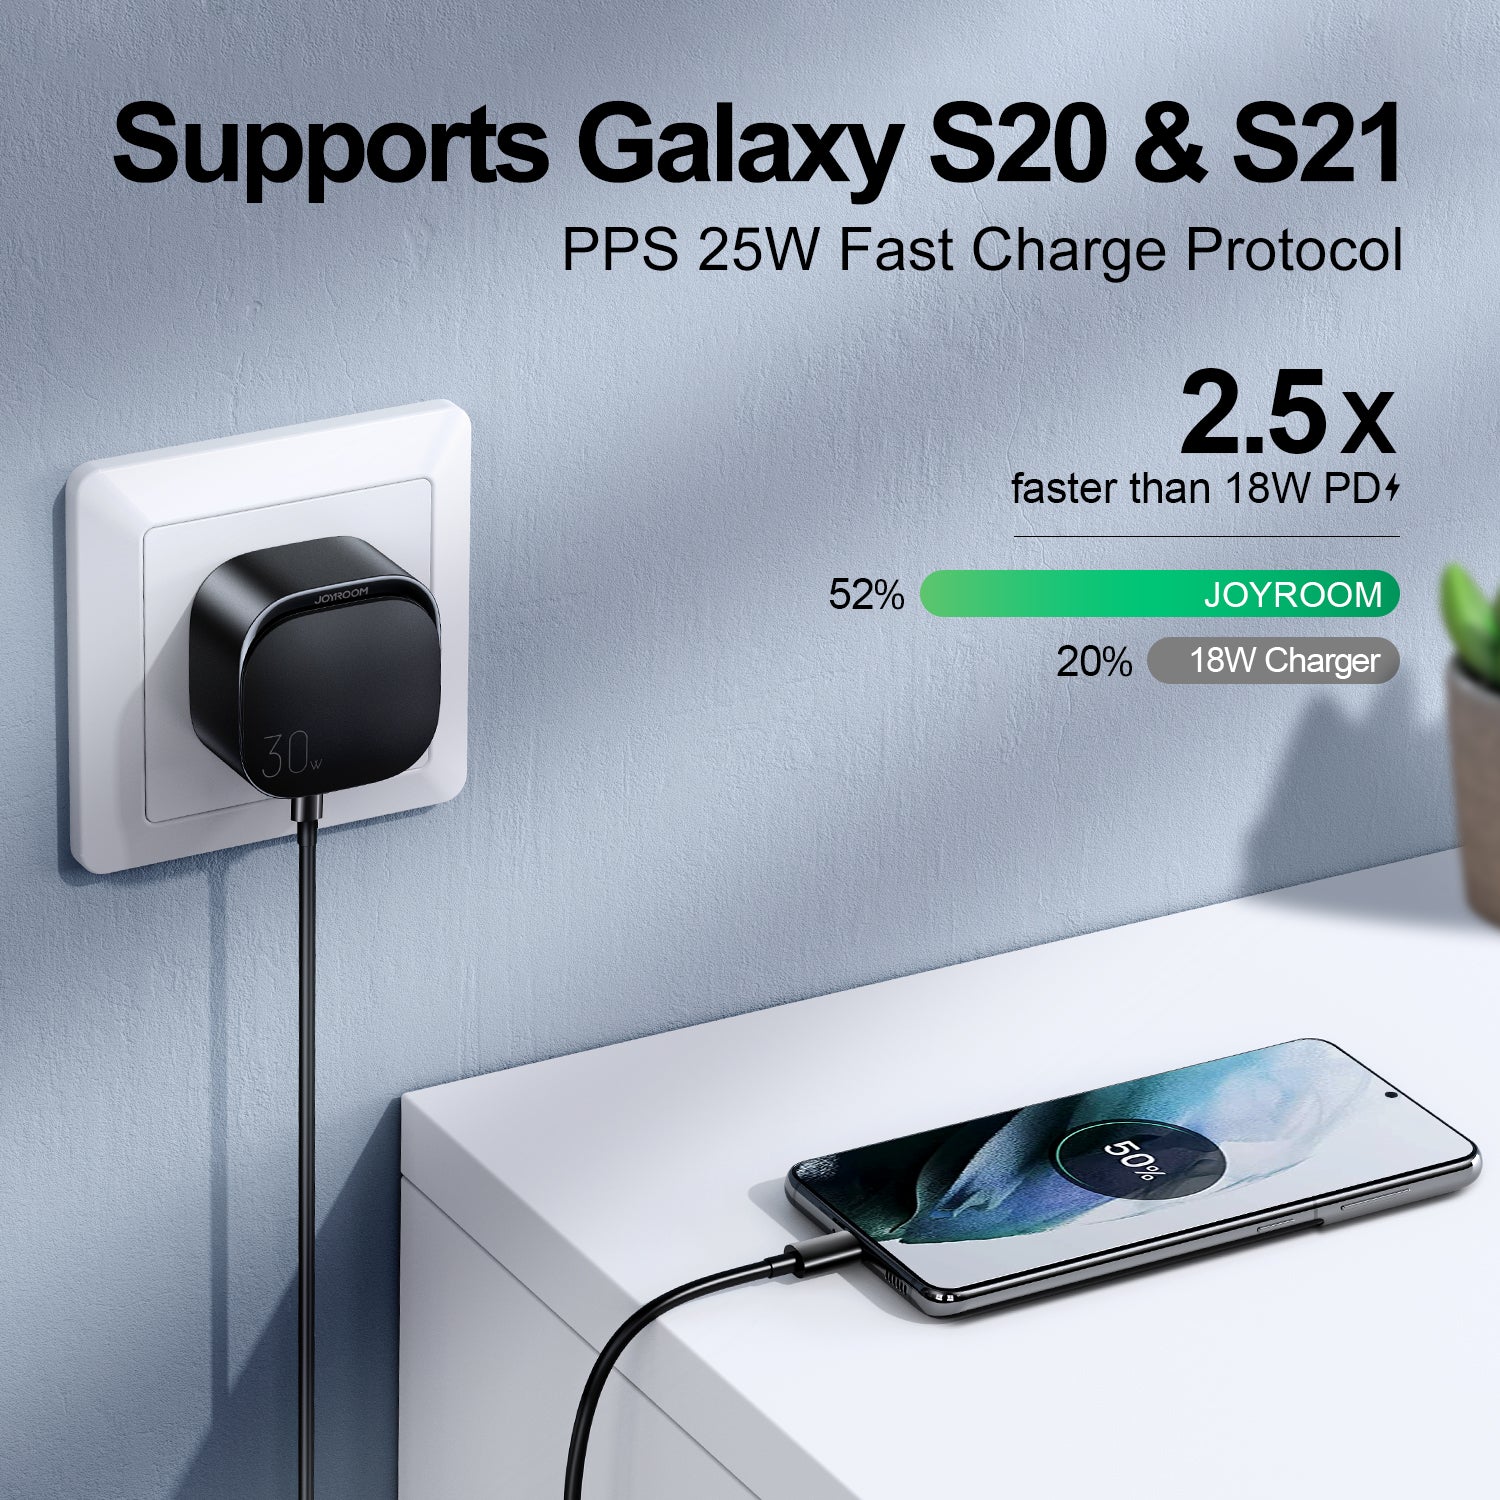 L-P307 30W PD Fast Charger for iPhone 13/Mini/Pro/Pro Max (UK)